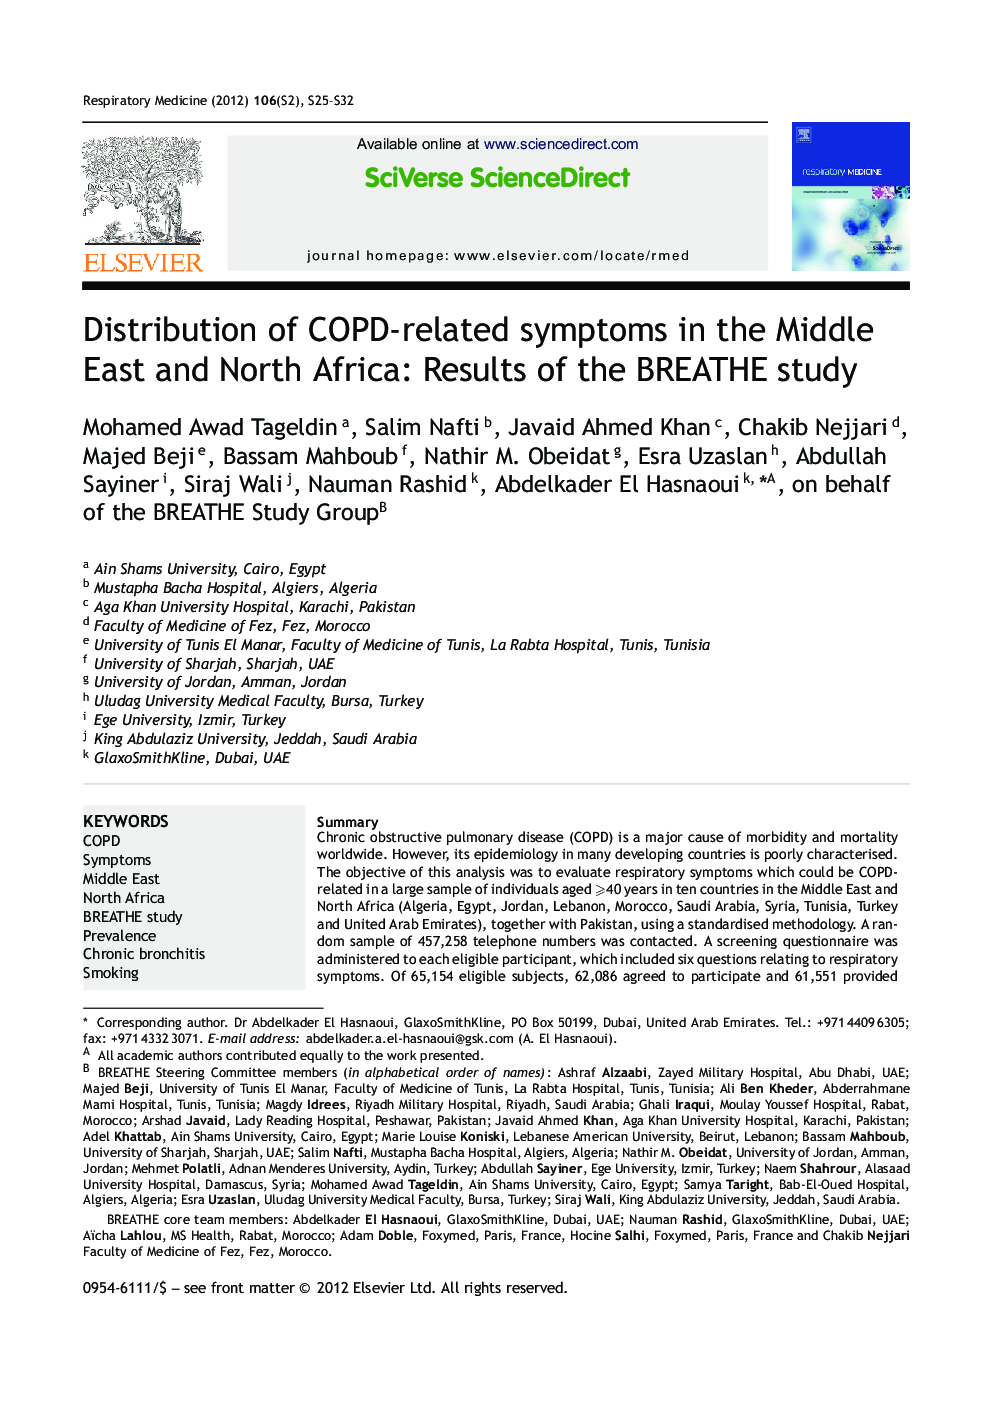 Distribution of COPD-related symptoms in the Middle East and North Africa: Results of the BREATHE study 